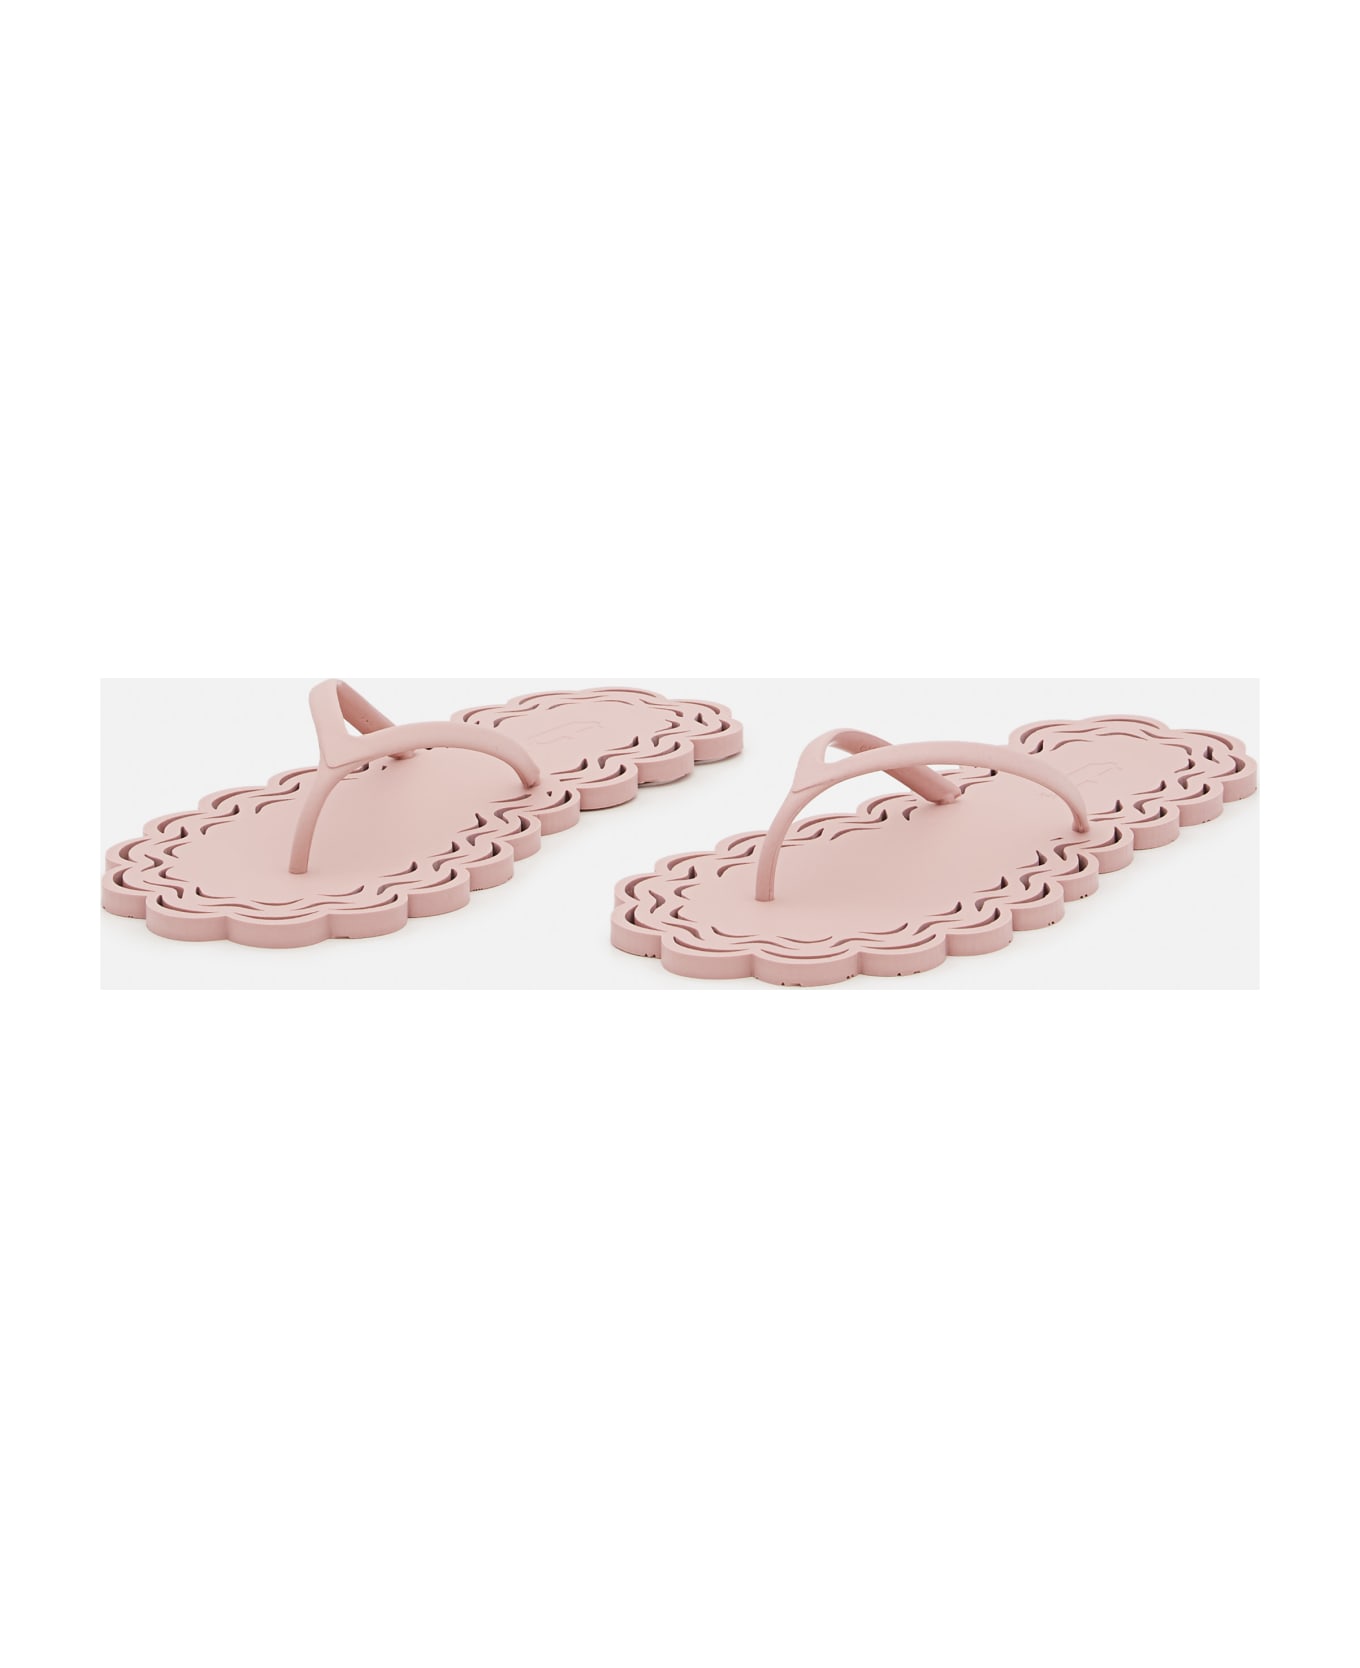 Carlotha Ray Laser-cut Recycled Rubber Flip Flops - Pink